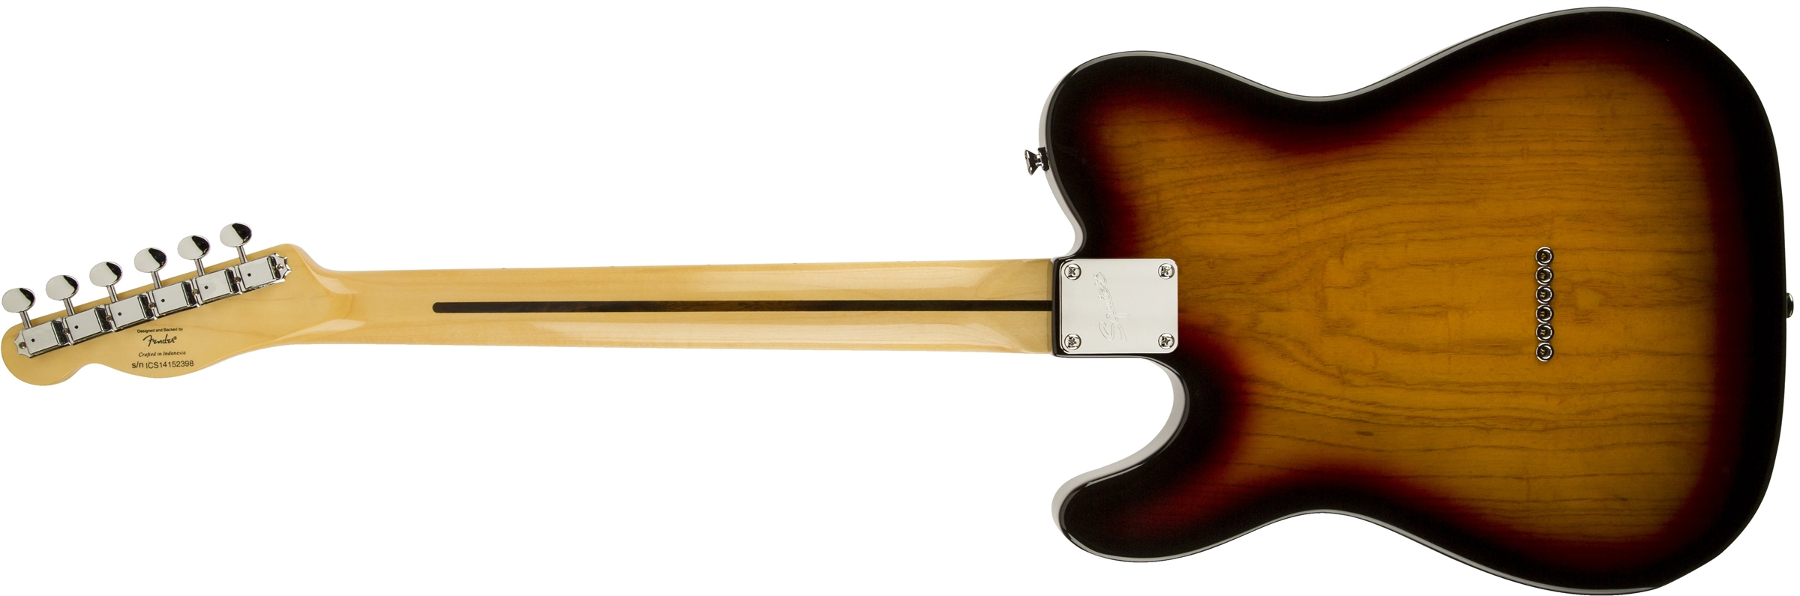 squier thinline telecaster 72 review